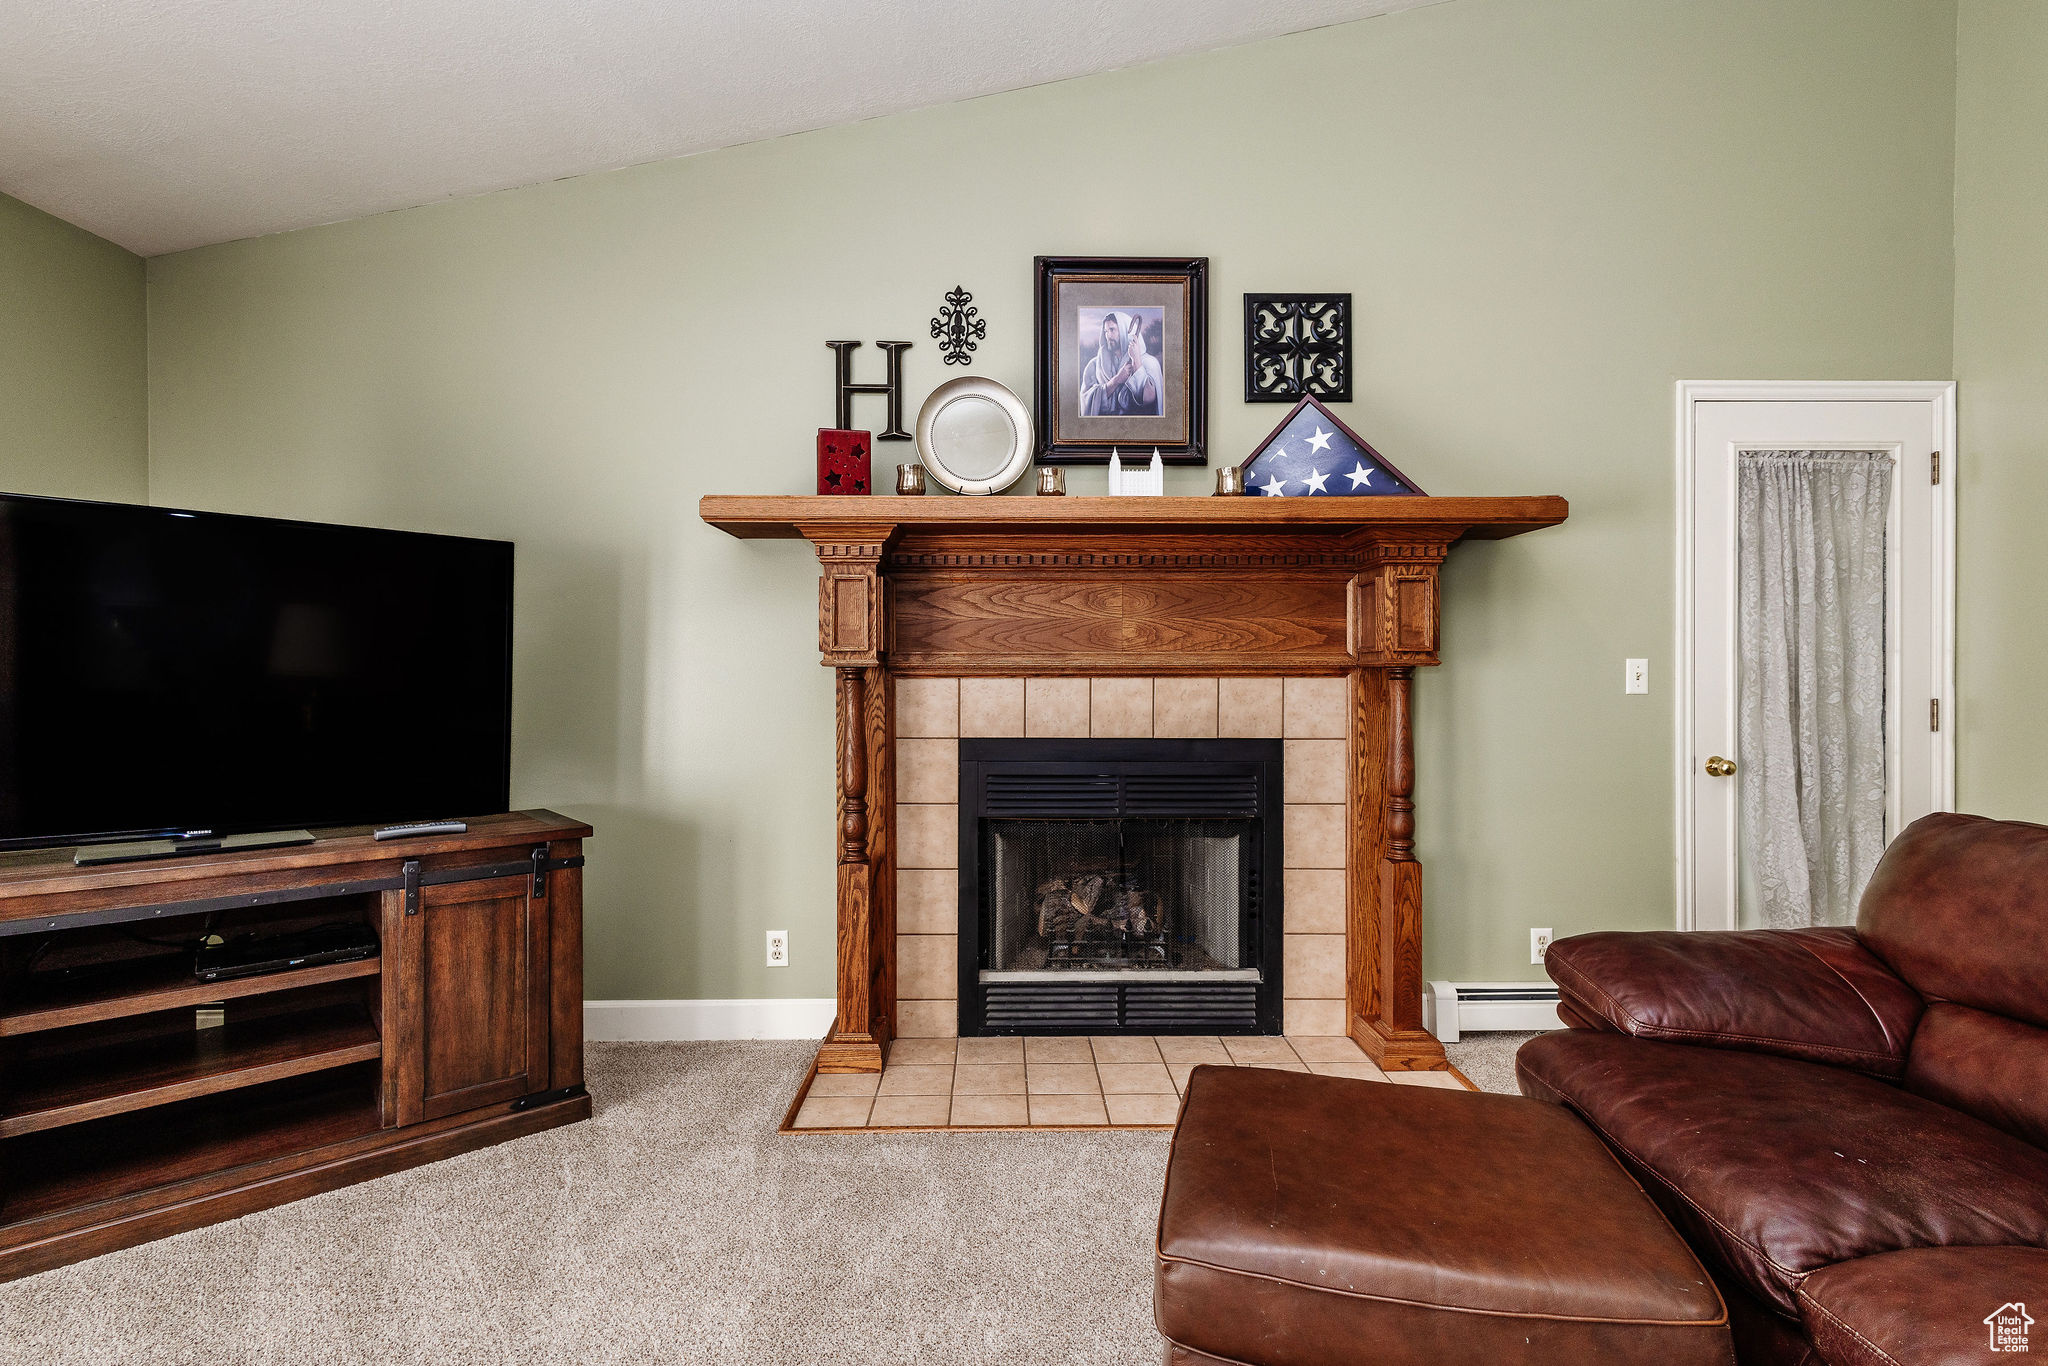 Carpeted living room with vaulted ceiling, a tile fireplace, and a baseboard heating unit